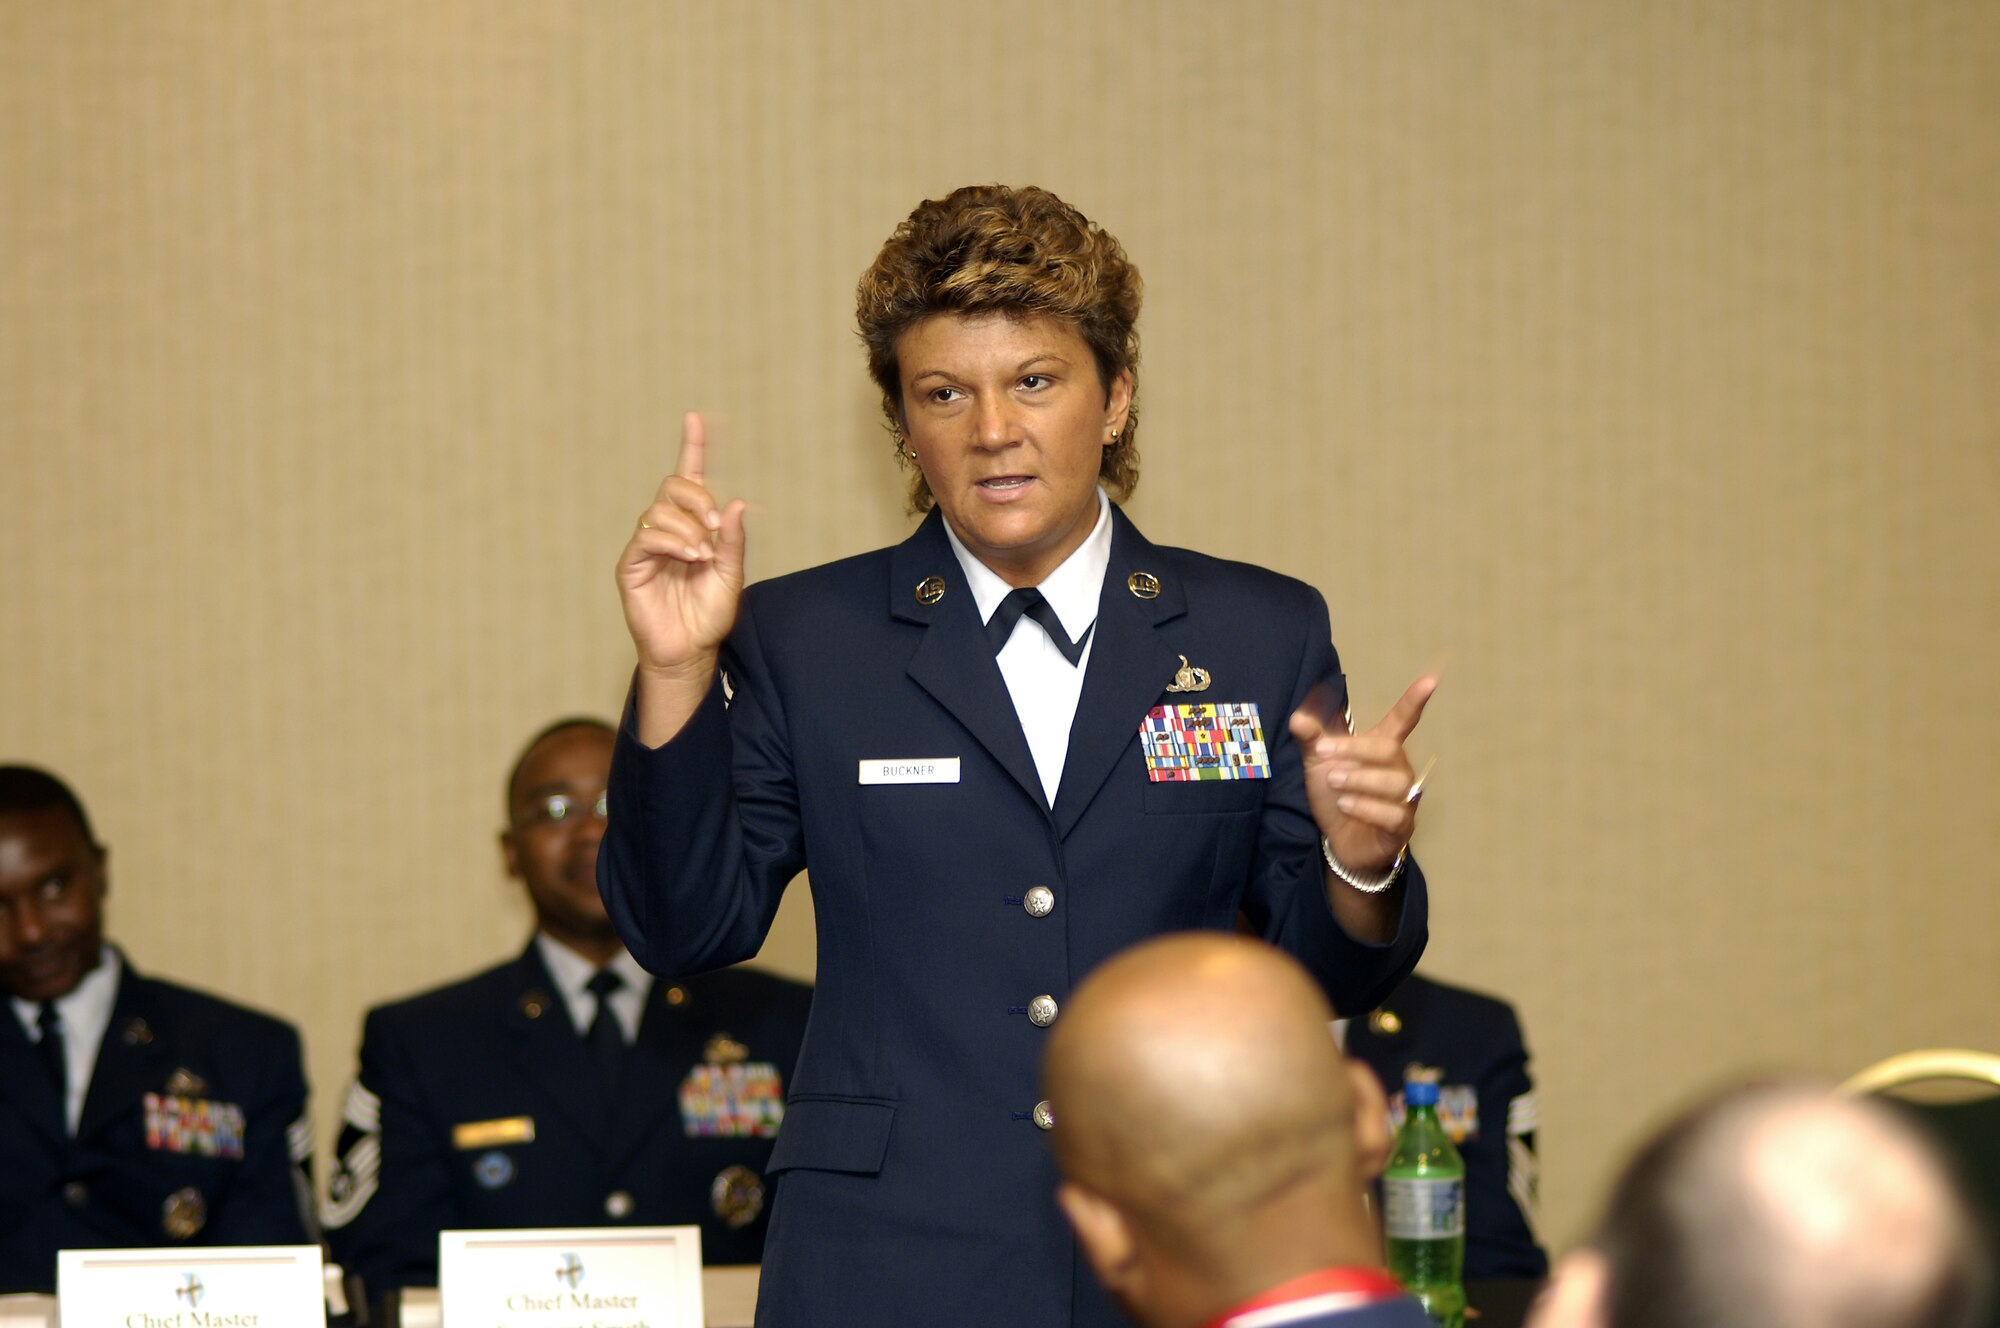 Chief Master Sgt. Kathleen Buckner, individual mobilization augmentee to the Air Force Reserve Command command chief master sergeant, speaks during the enlisted mentorship forum at the Tuskegee Airmen National Convention July 17 in Philadelphia. The mentorship forums provided servicemembers an opportunity to discuss various issues on diversity and development in the Armed Forces with senior officer and enlisted members. (U.S. Air Force photo/Kenn Mann) 
